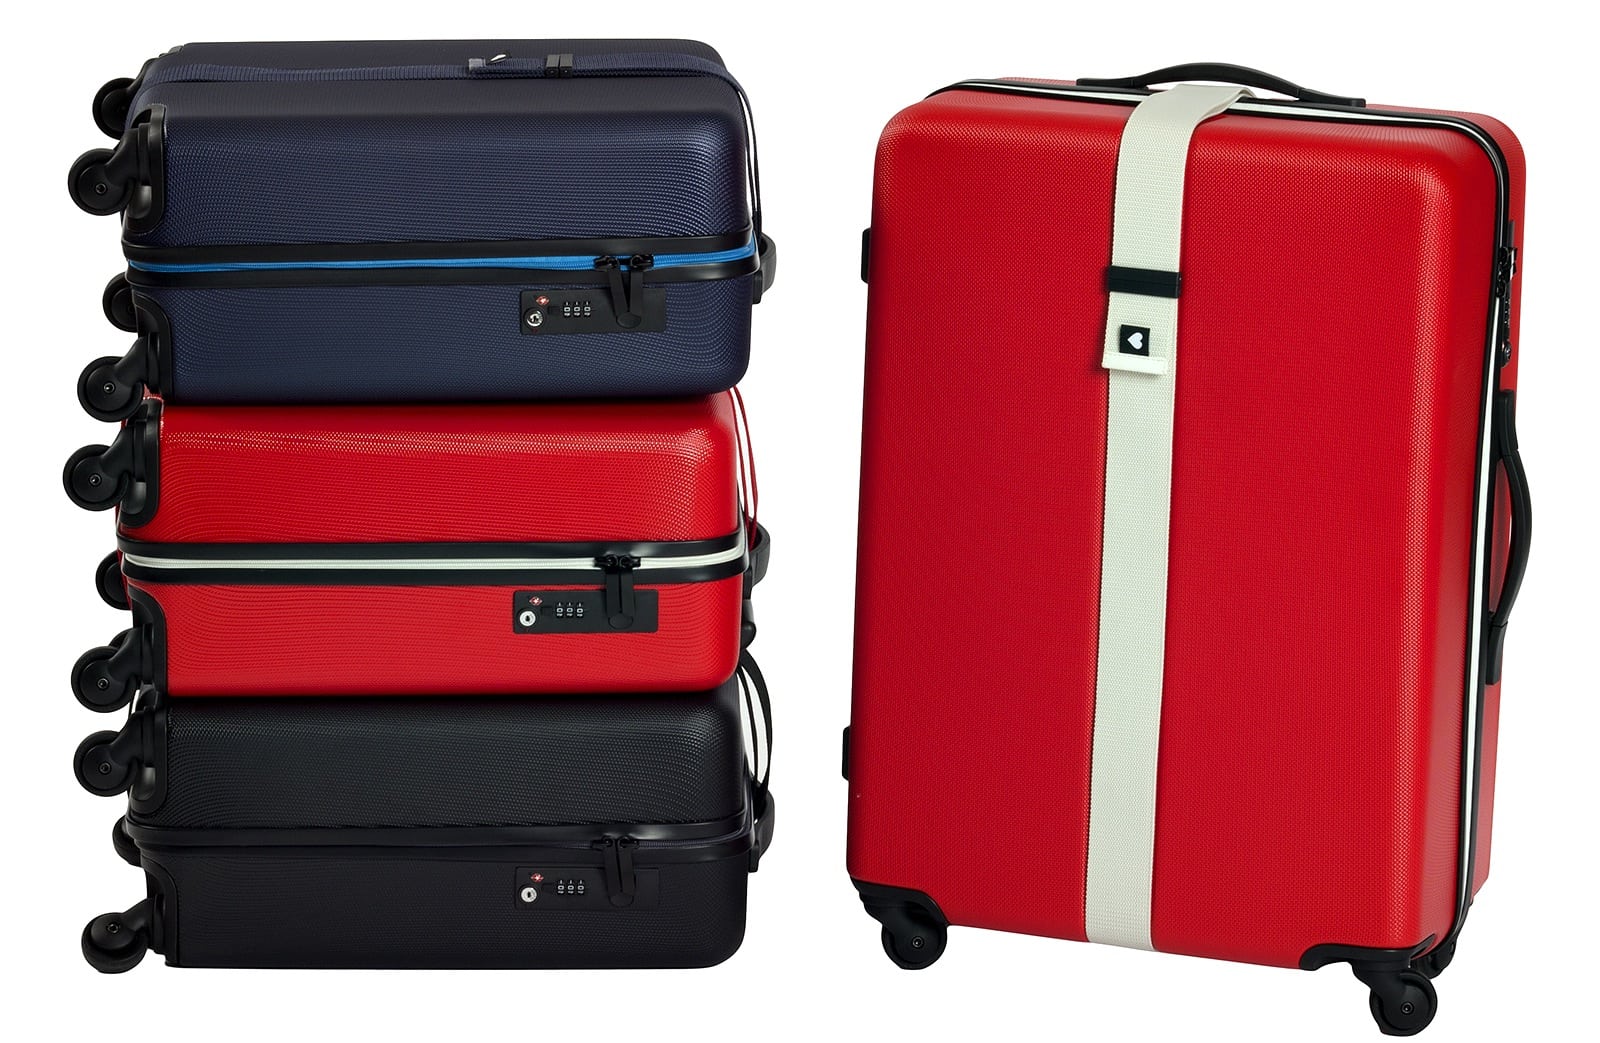 Fab.com's new luggage line has what the company calls a "Catch Me If You Can" vibe. 